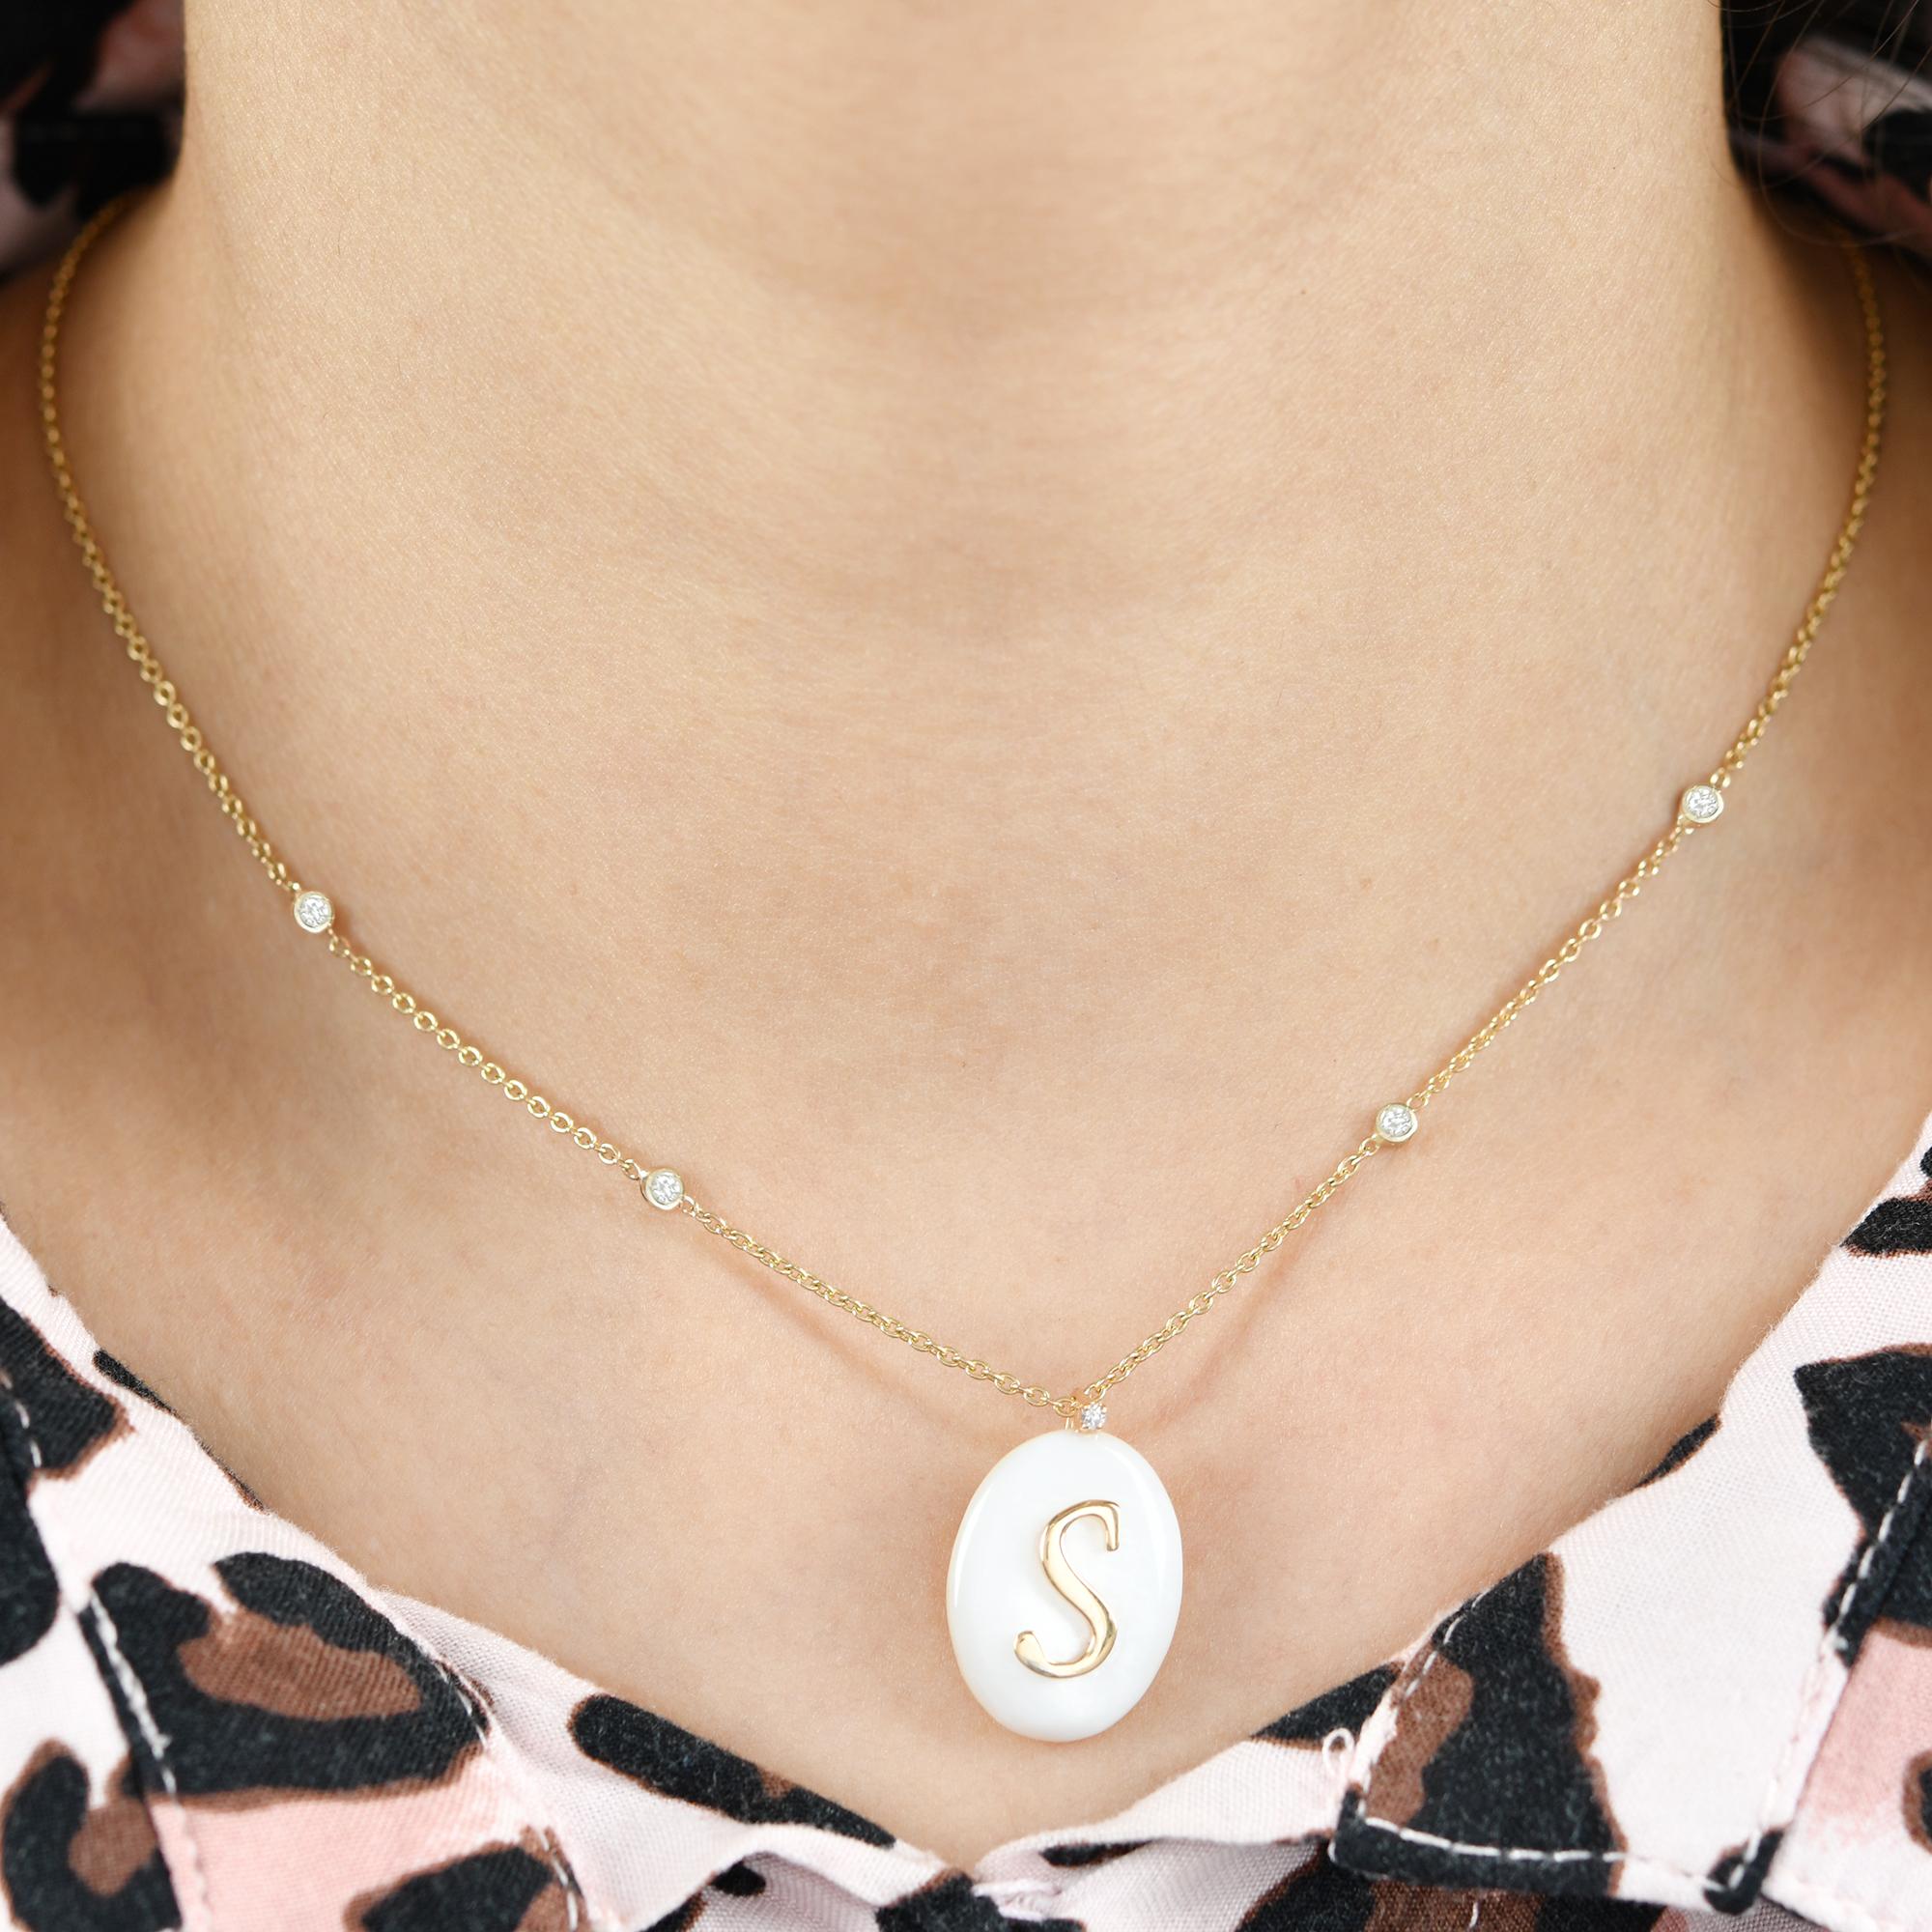 Introducing the elegant Oval Pearl Gemstone Initial S Charm Pendant in 18 Karat Yellow Gold with Diamond accents, a timeless and personalized piece of fine jewelry that combines the beauty of pearls, the luxury of yellow gold, and the sparkle of